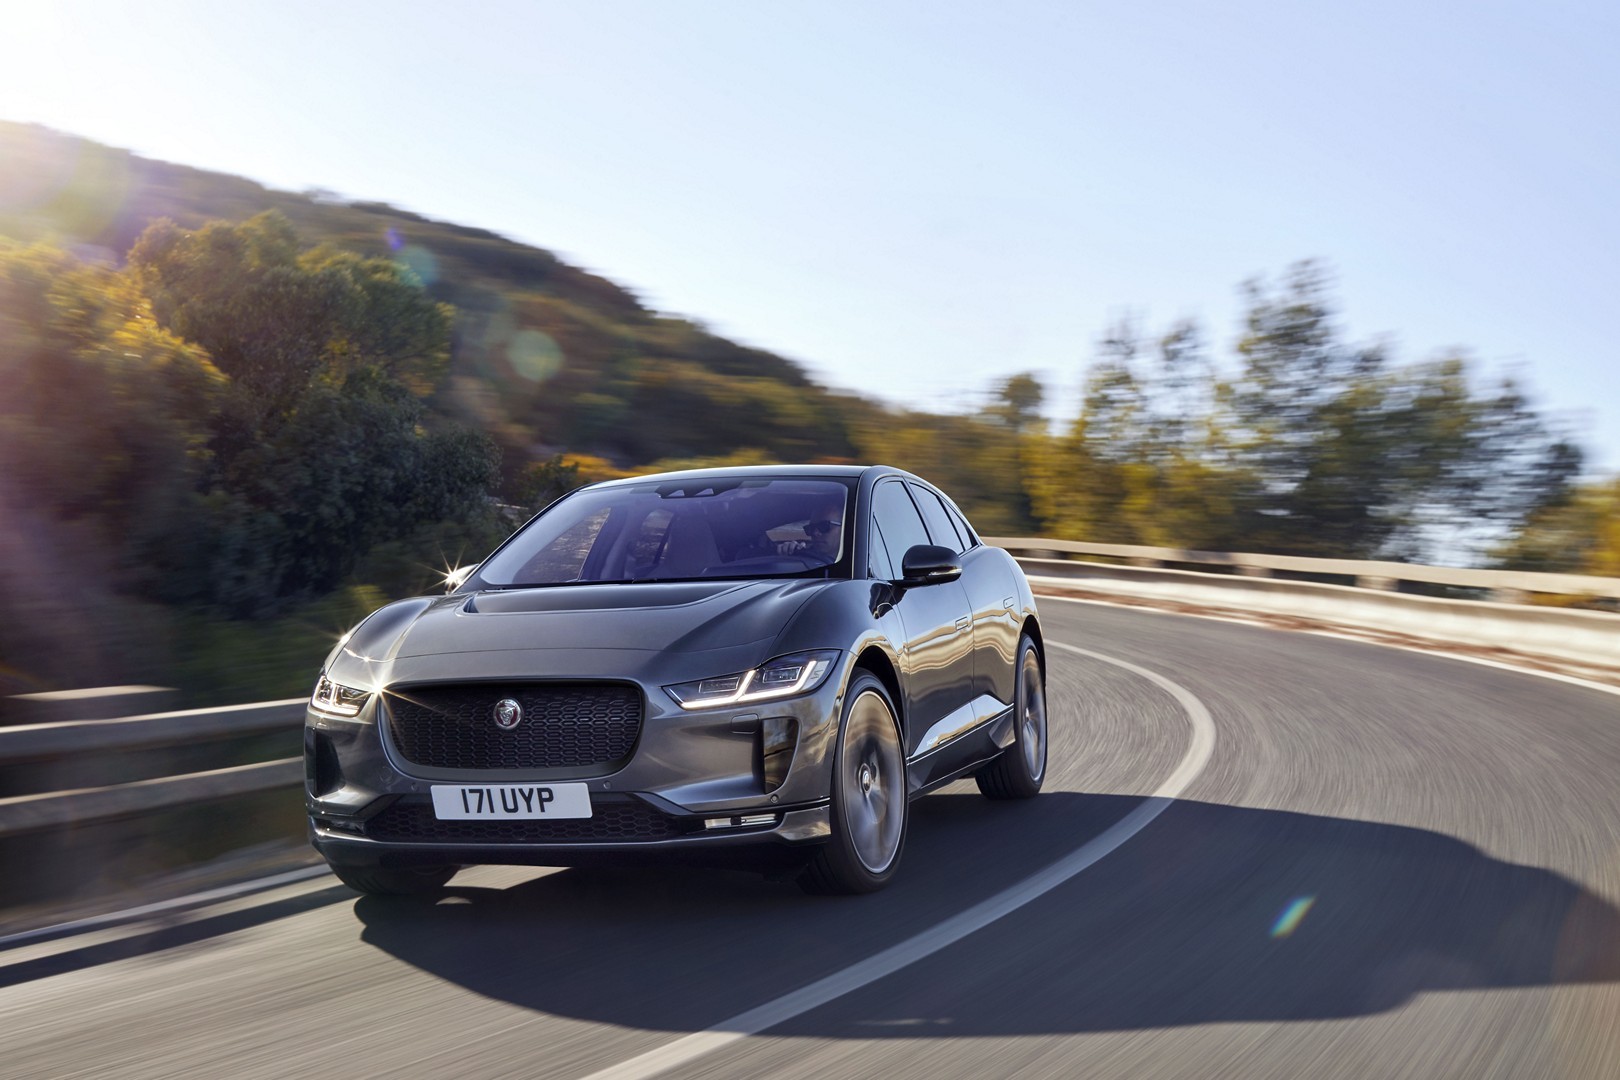 https://s1.cdn.autoevolution.com/images/news/gallery/2020-jaguar-i-pace-update-offers-234-miles-of-range-thanks-to-etrophy-know-how_59.jpg